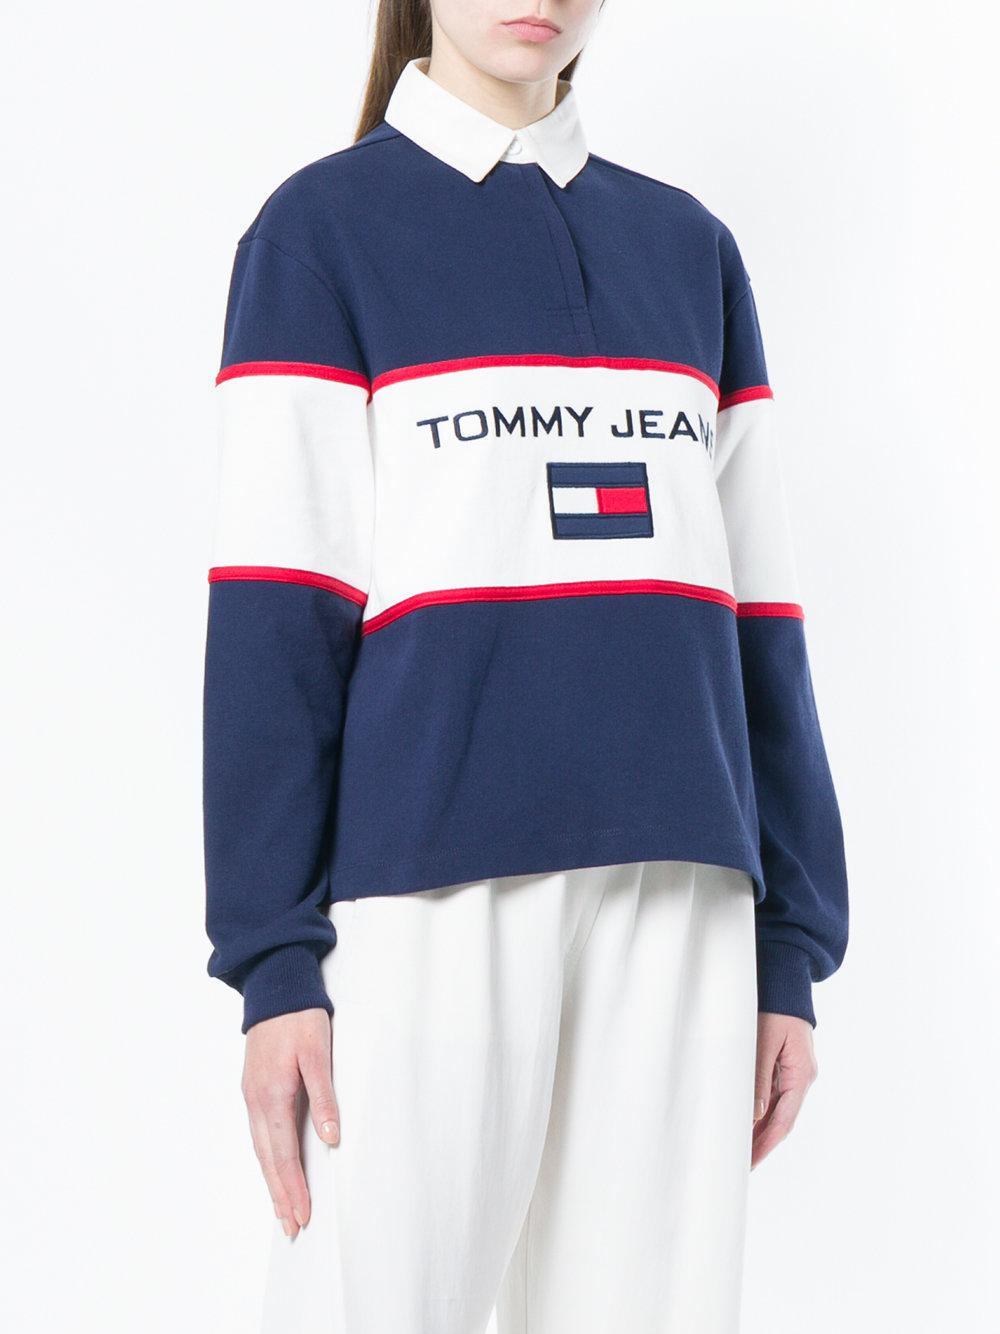 Buy > tommy hilfiger rugby shirt > in stock